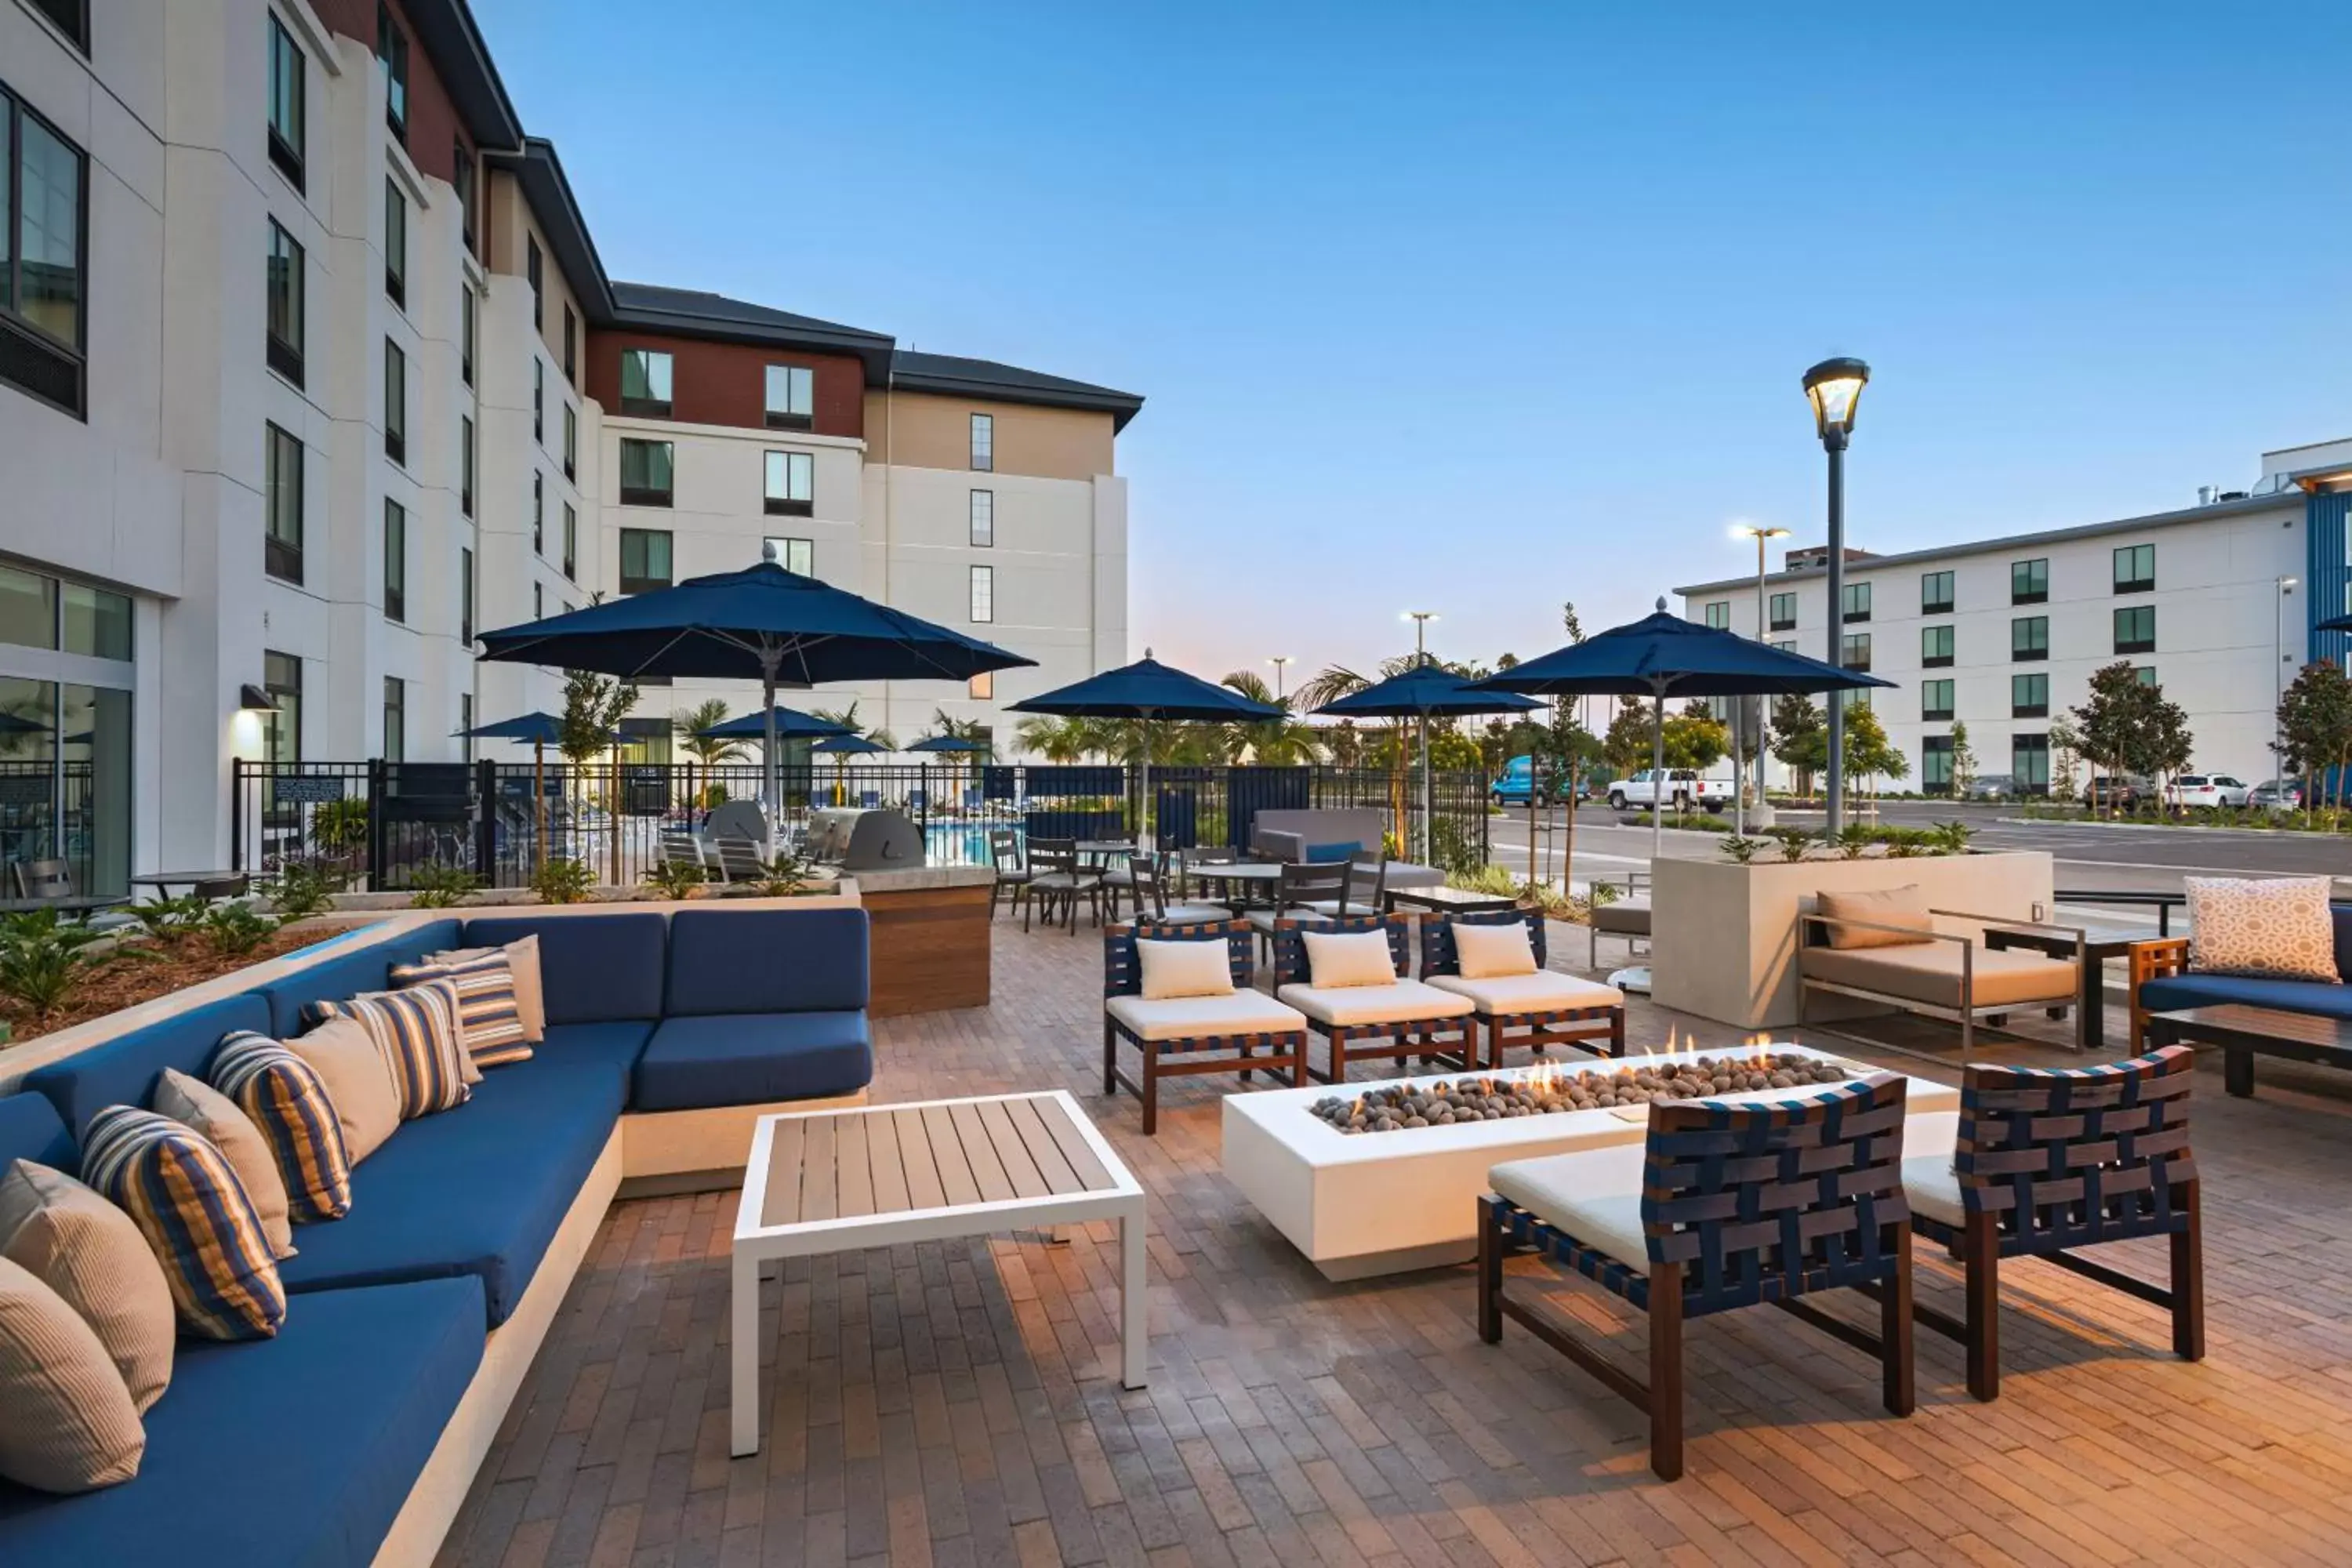 Property building in TownePlace Suites by Marriott San Diego Airport/Liberty Station